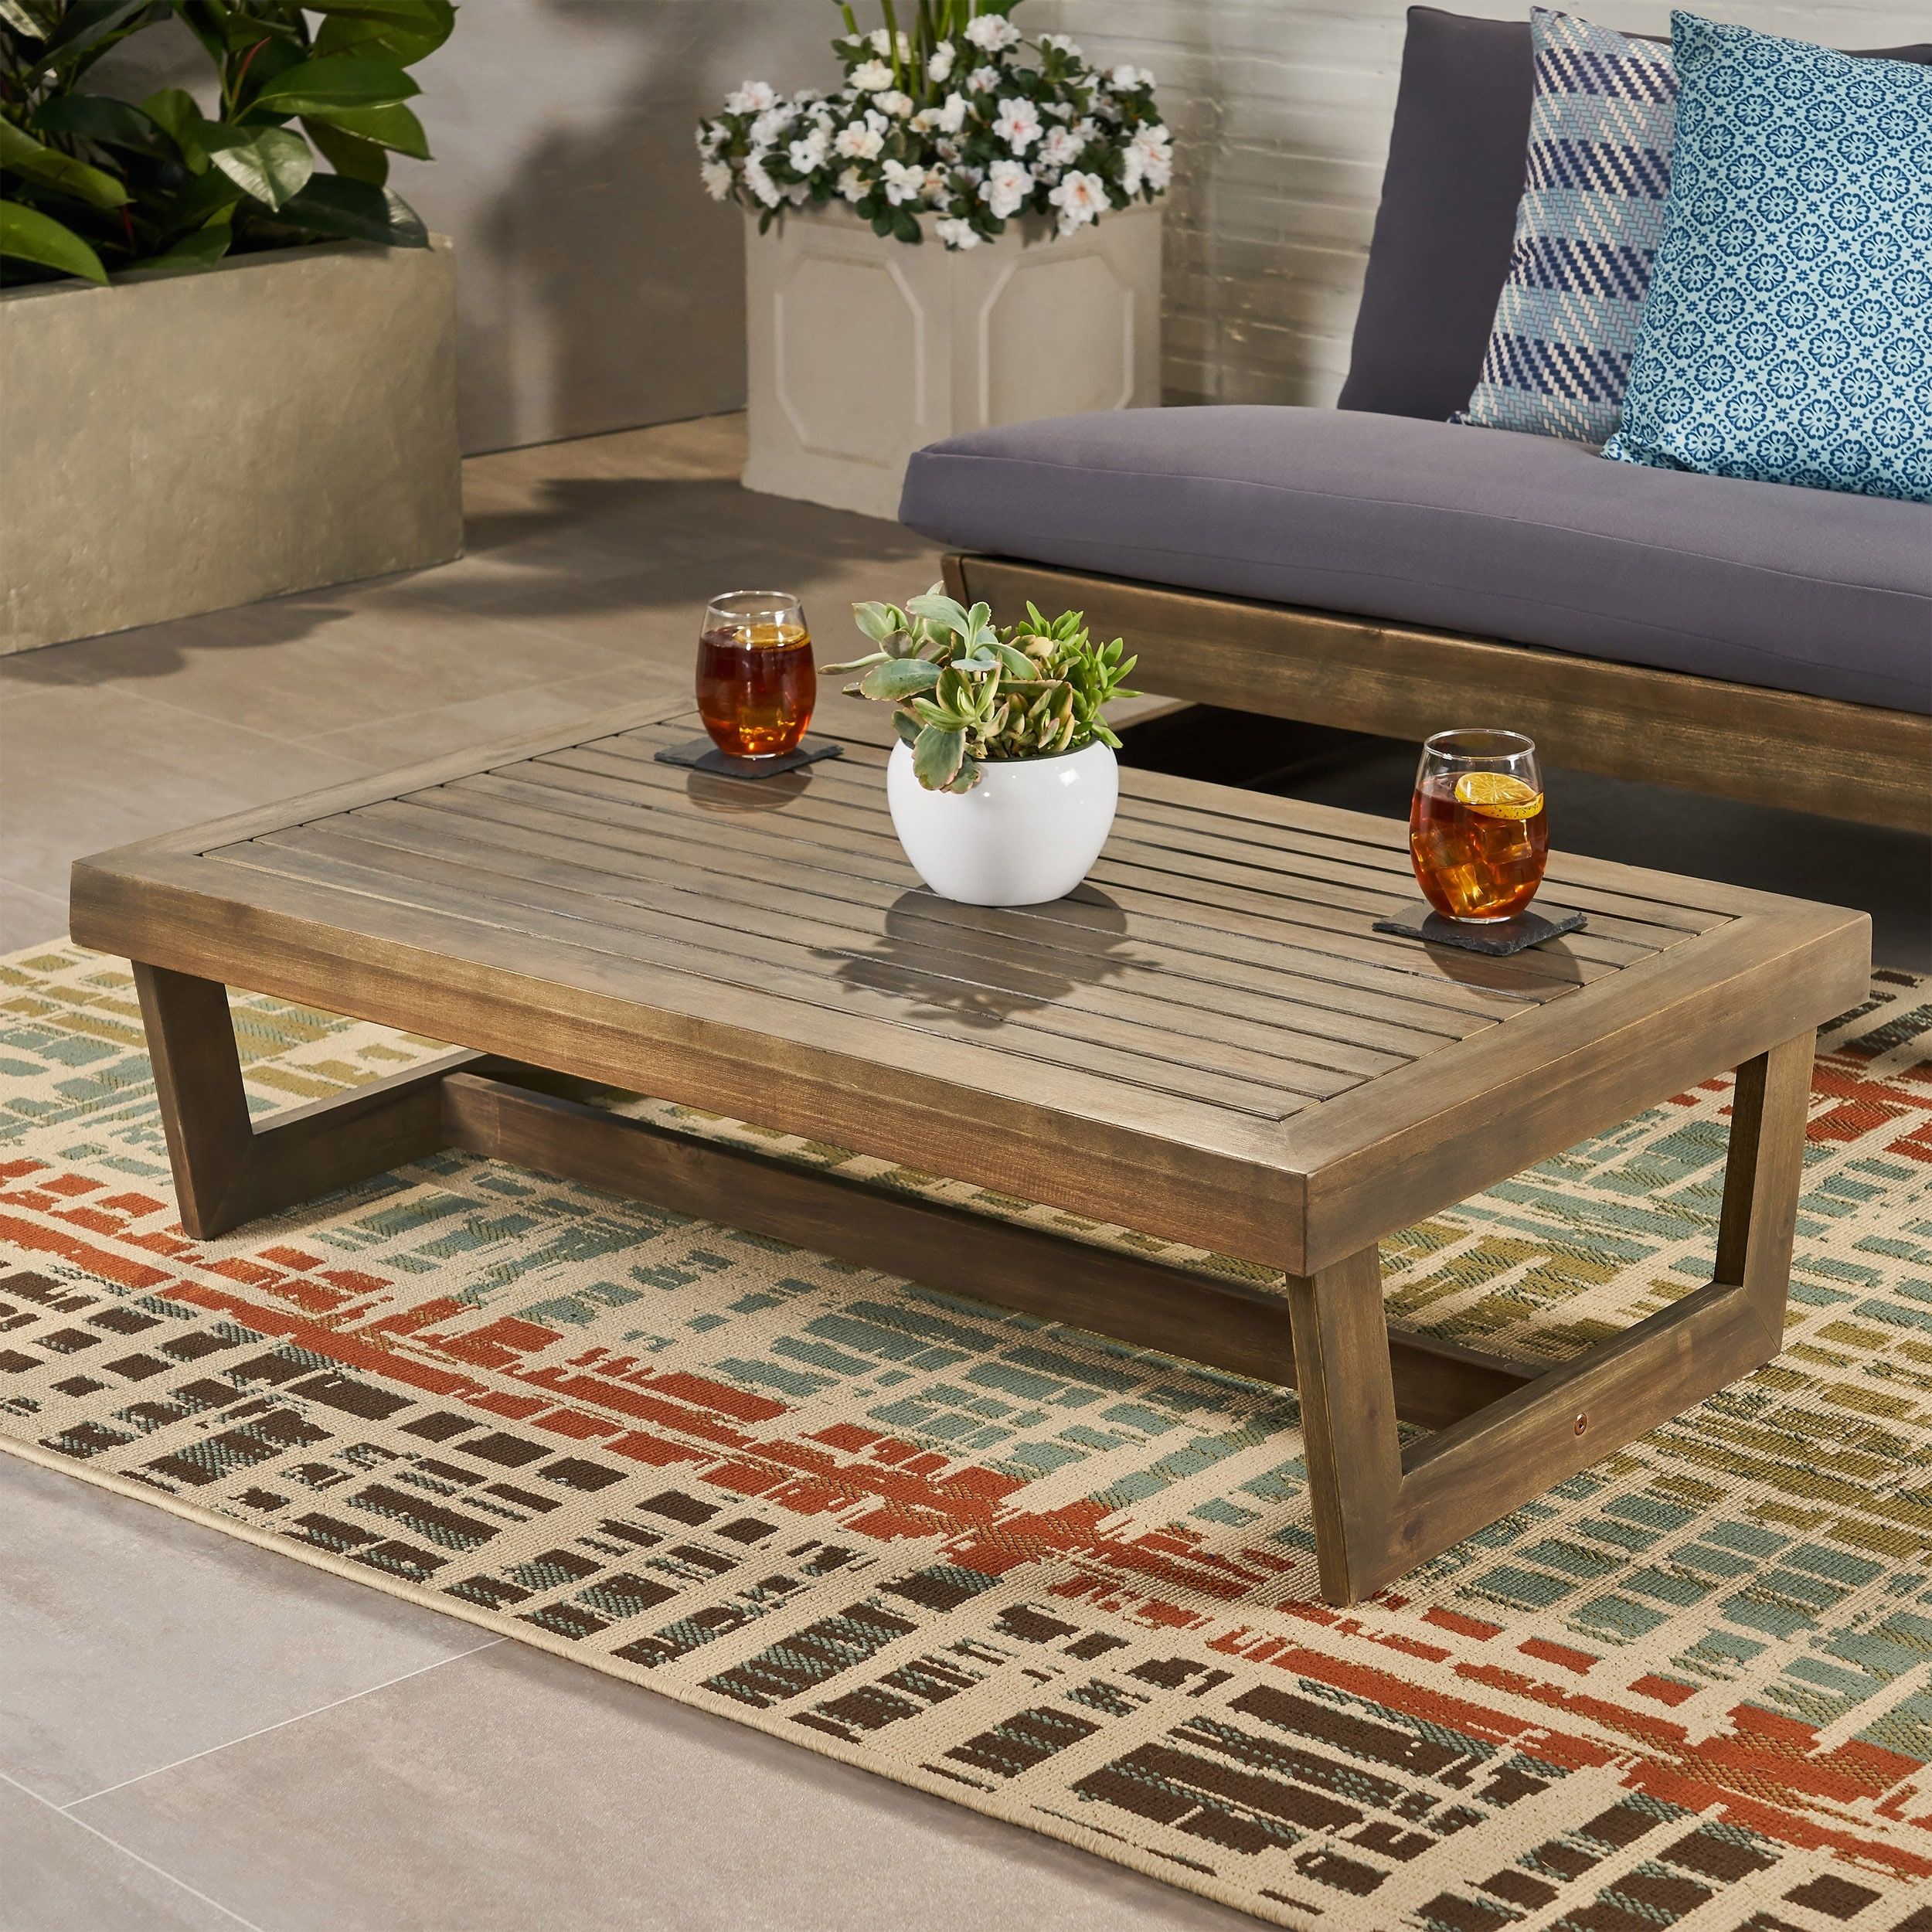 Sherwood Outdoor Acacia Wood Coffee Tablechristopher Knight Home – On  Sale – Overstock – 28422818 Throughout Acacia Wood Coffee Tables (View 2 of 20)